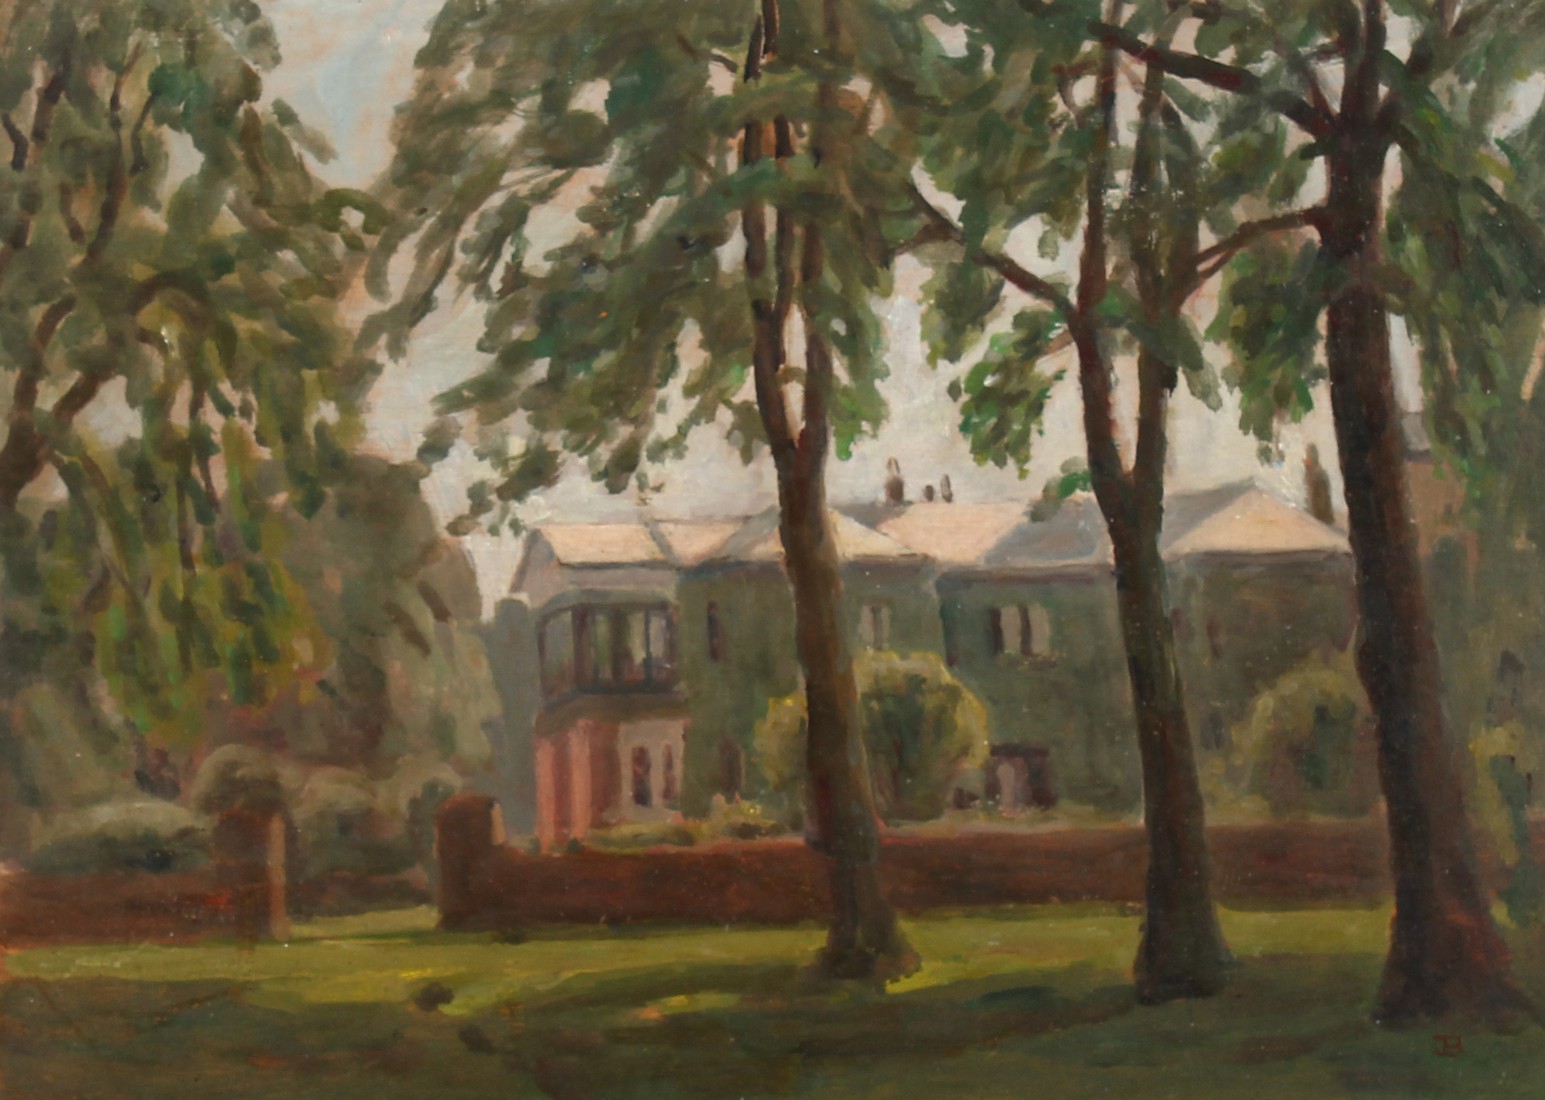 JOHN BROWN A house through the trees. Monogrammed. Oil on panel. 9.5ins x 13.5ins.